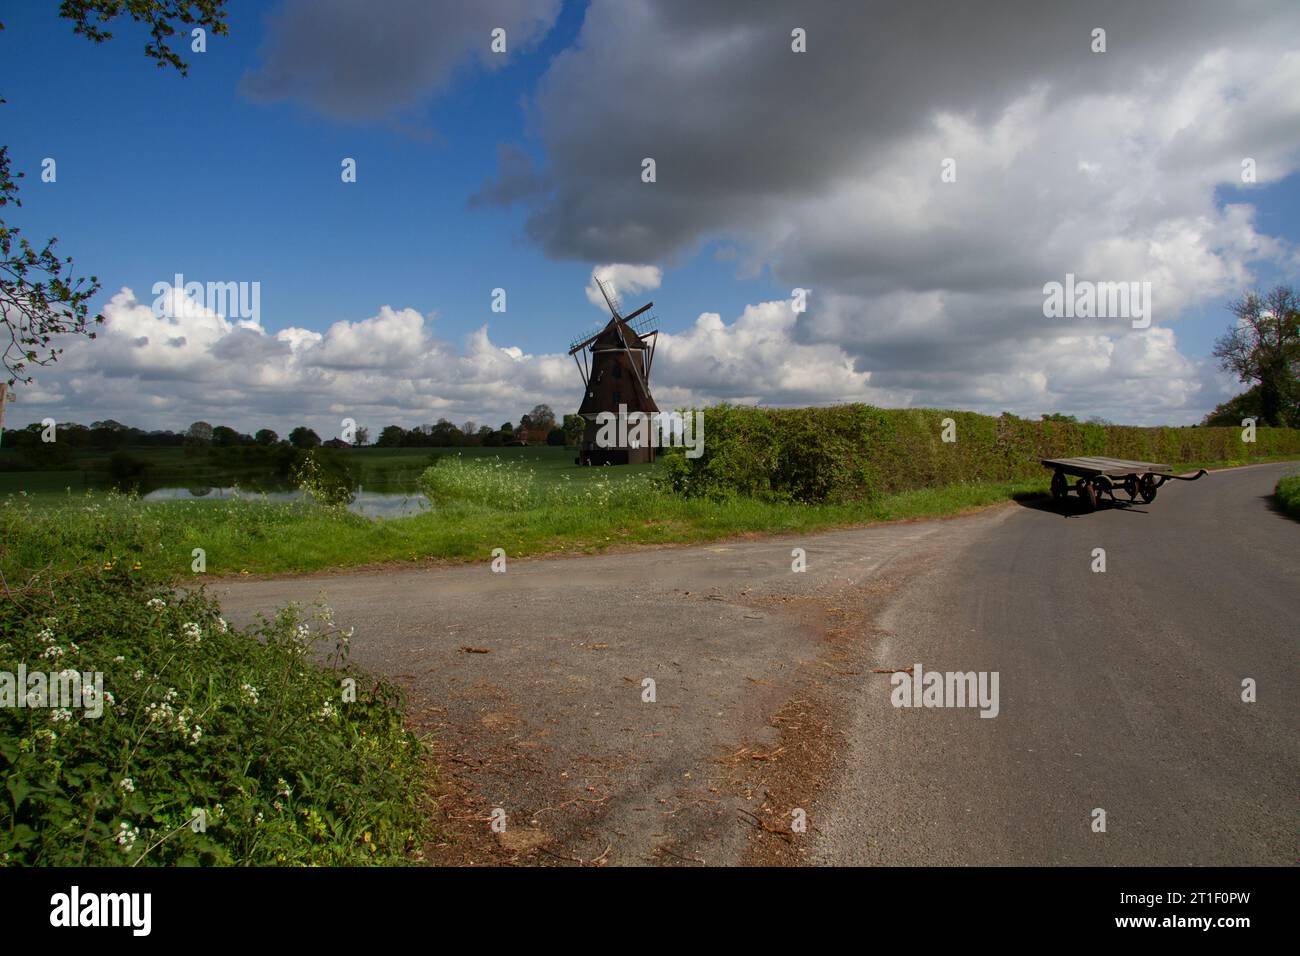 A rural landscape setting in Essex with a windmill near a pond, by a lane with an old wooden cart Stock Photo